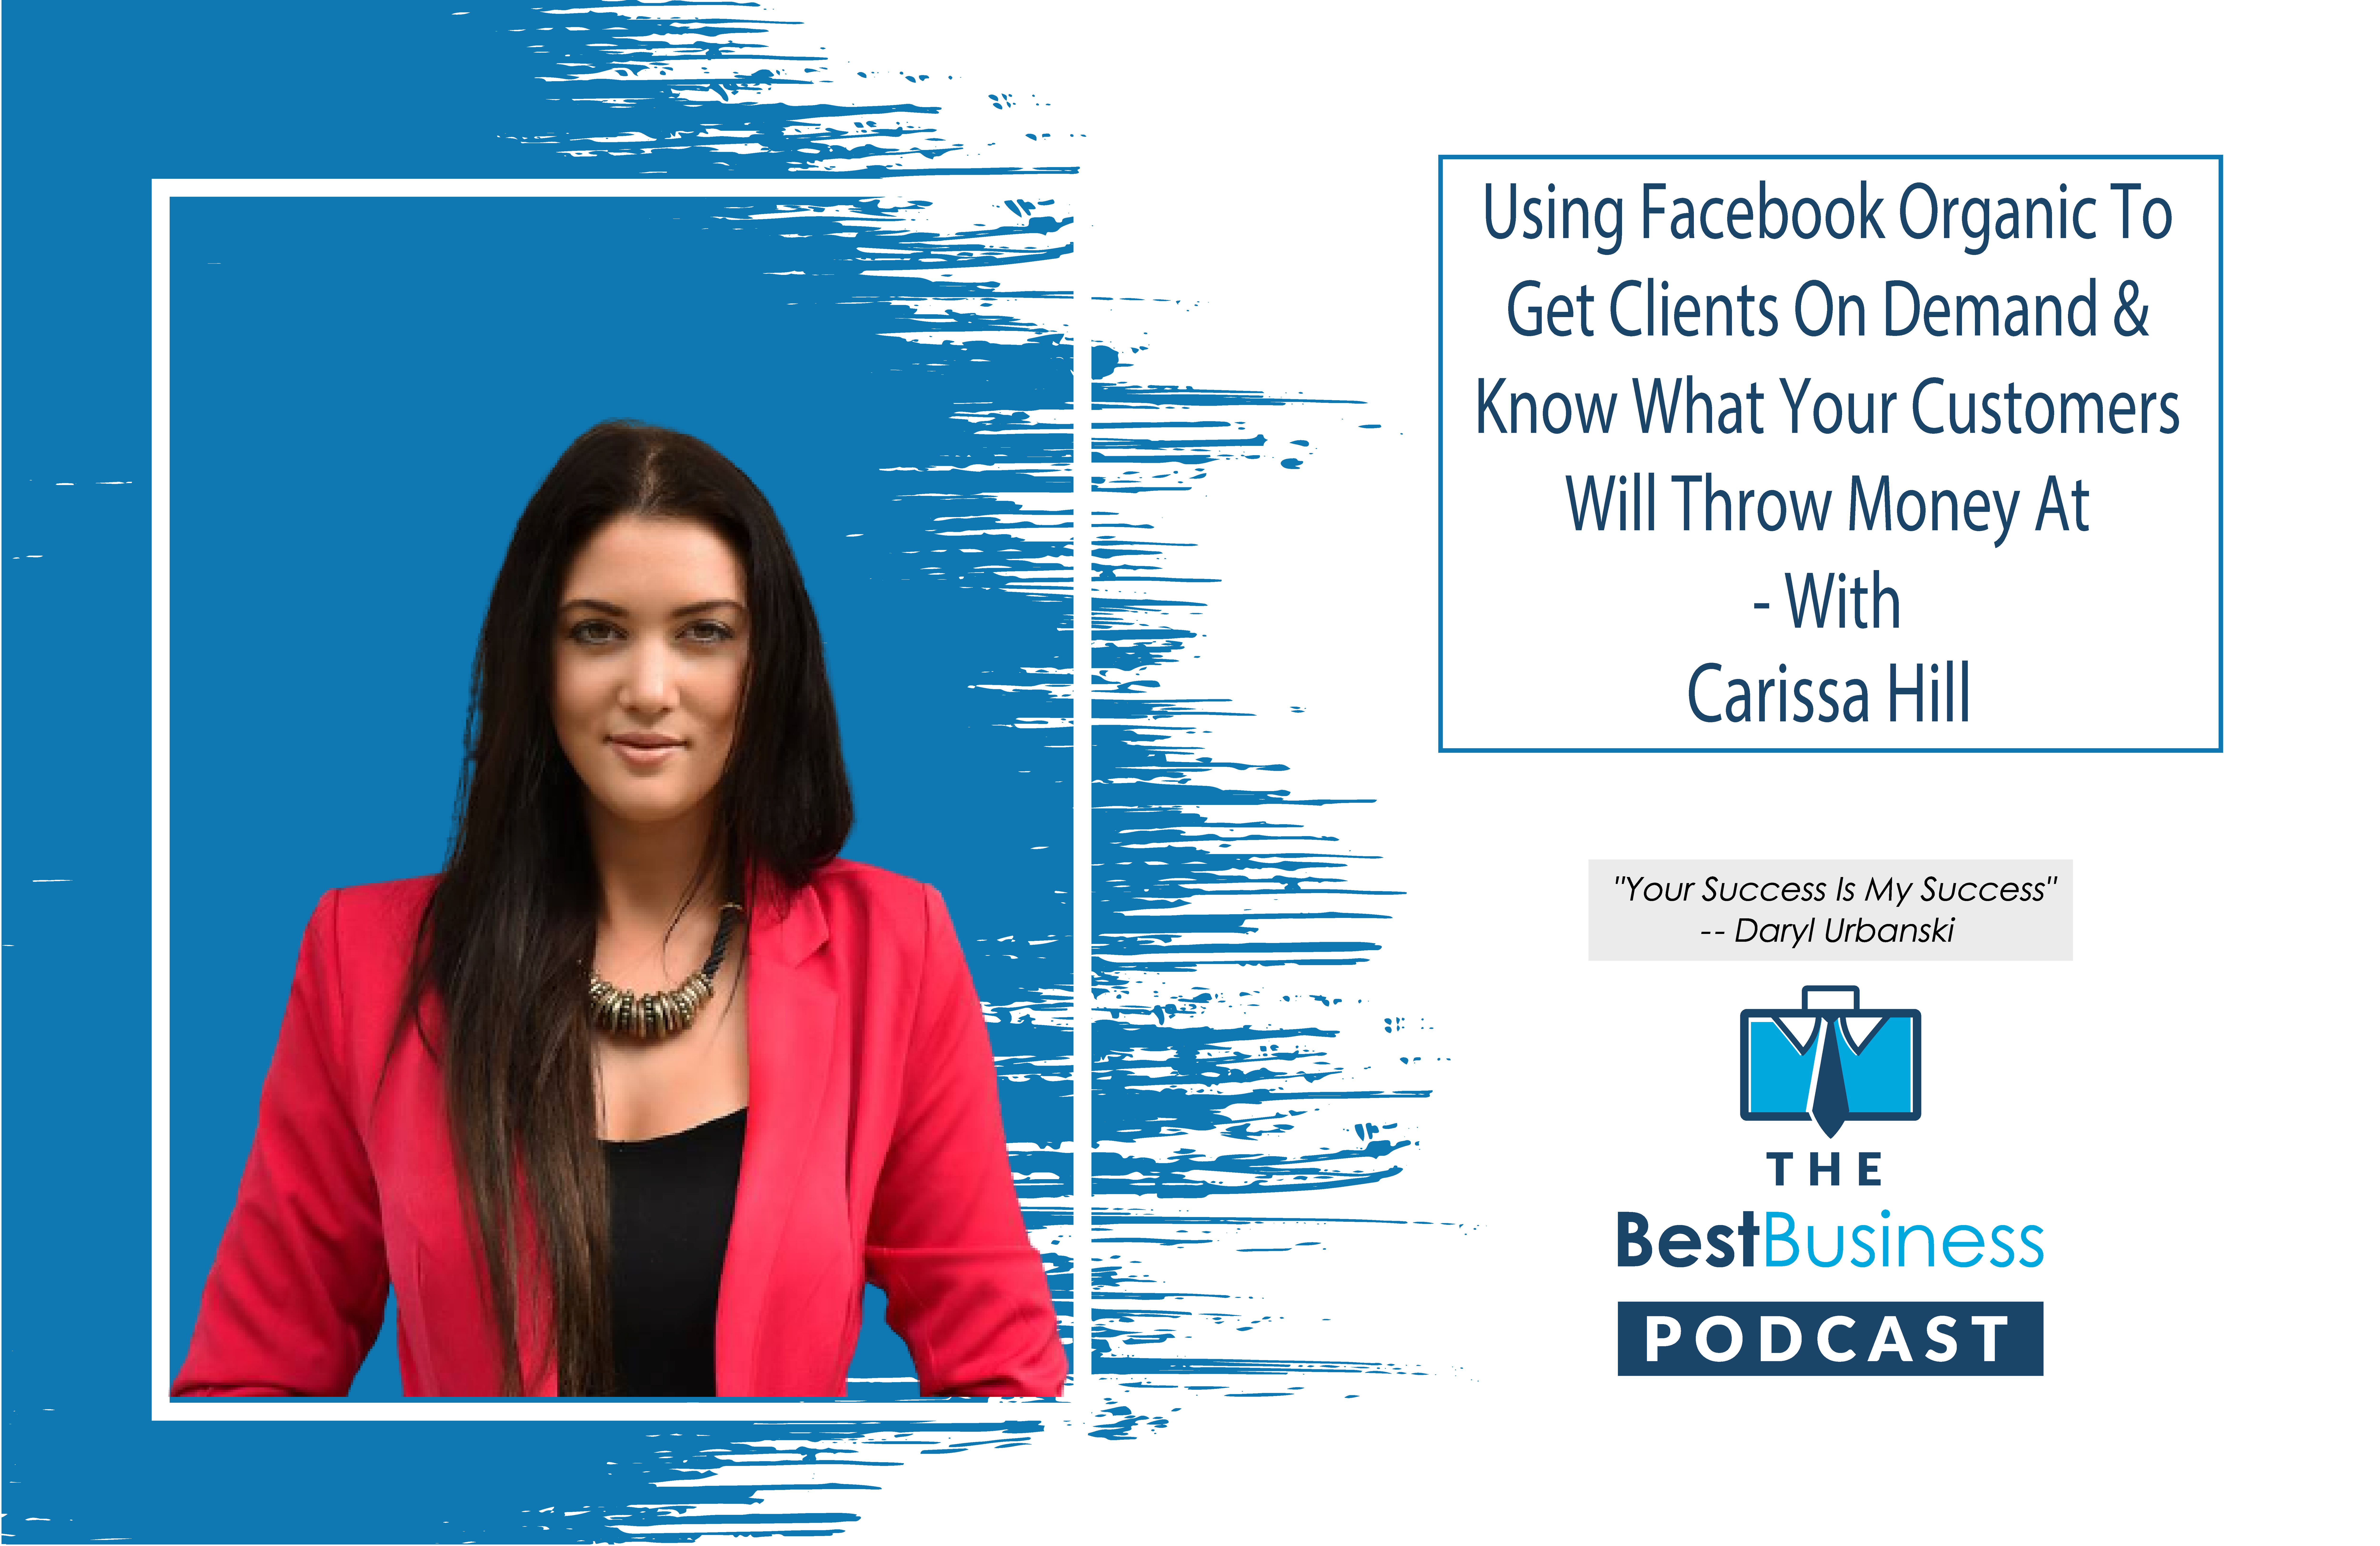 Carissa Hill, business coaching services